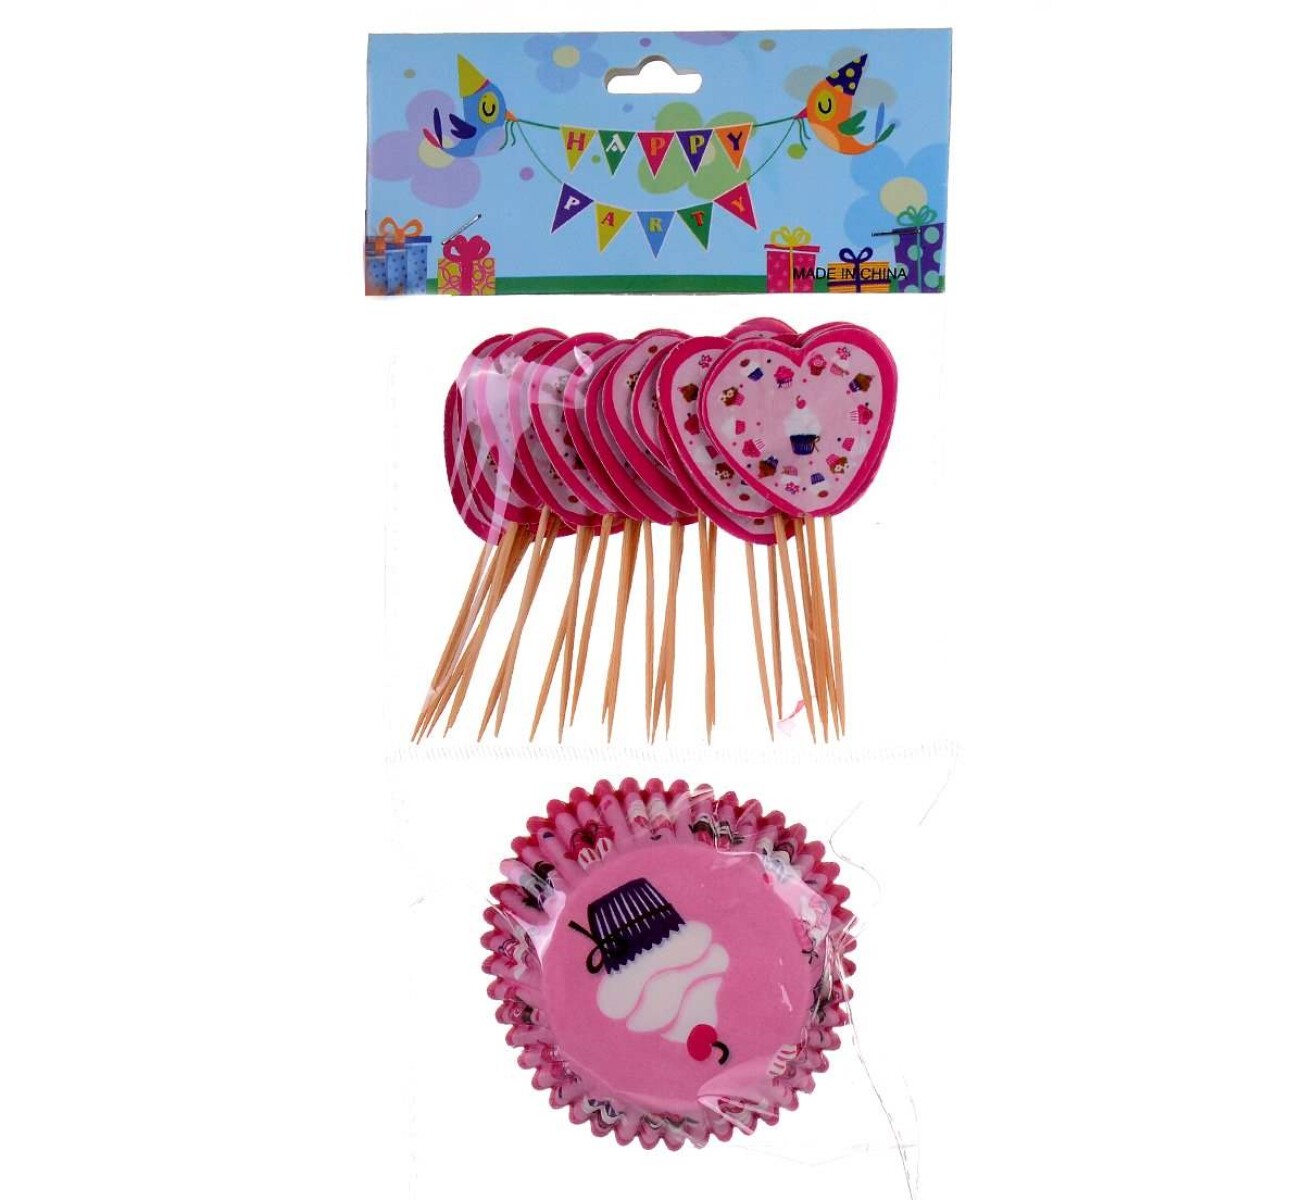 Set Muffins Con Topping Varios Diseños X24 